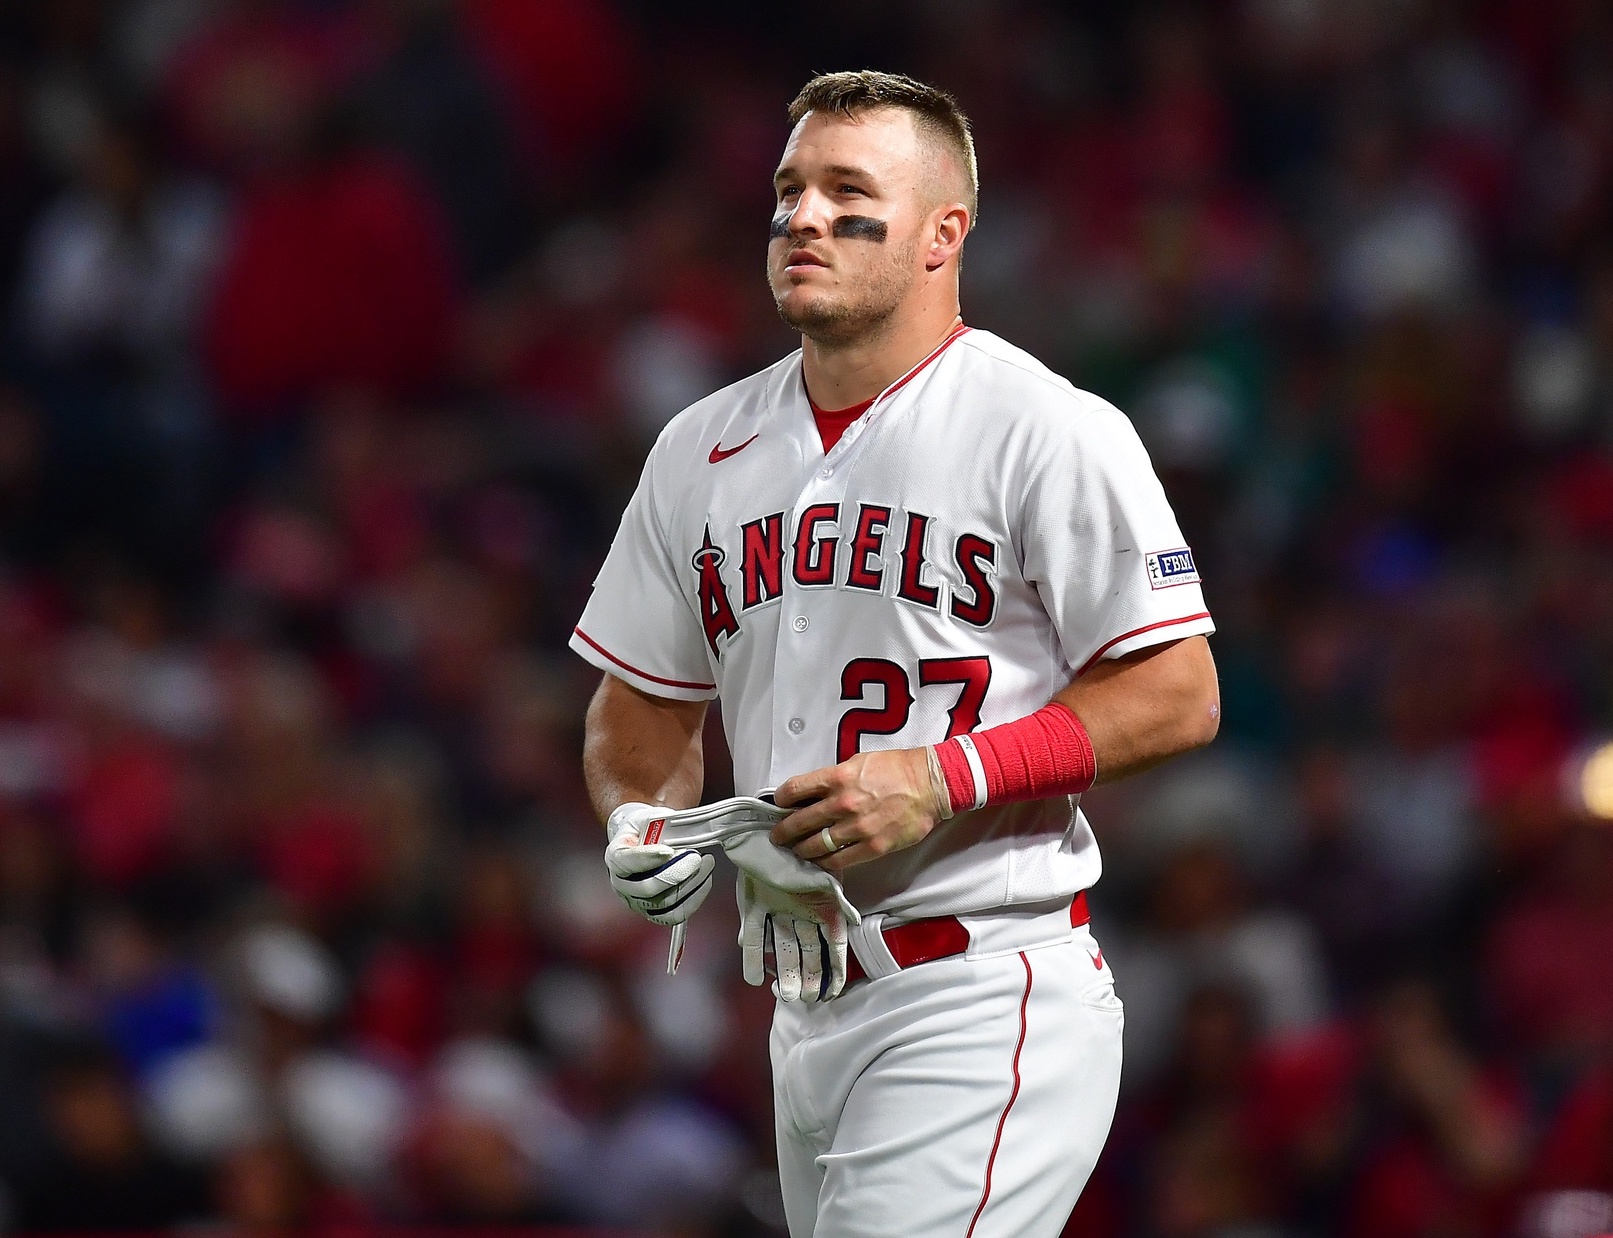 Angels Injury Update: Mike Trout Out For Season After Move To 60-Day IL ...